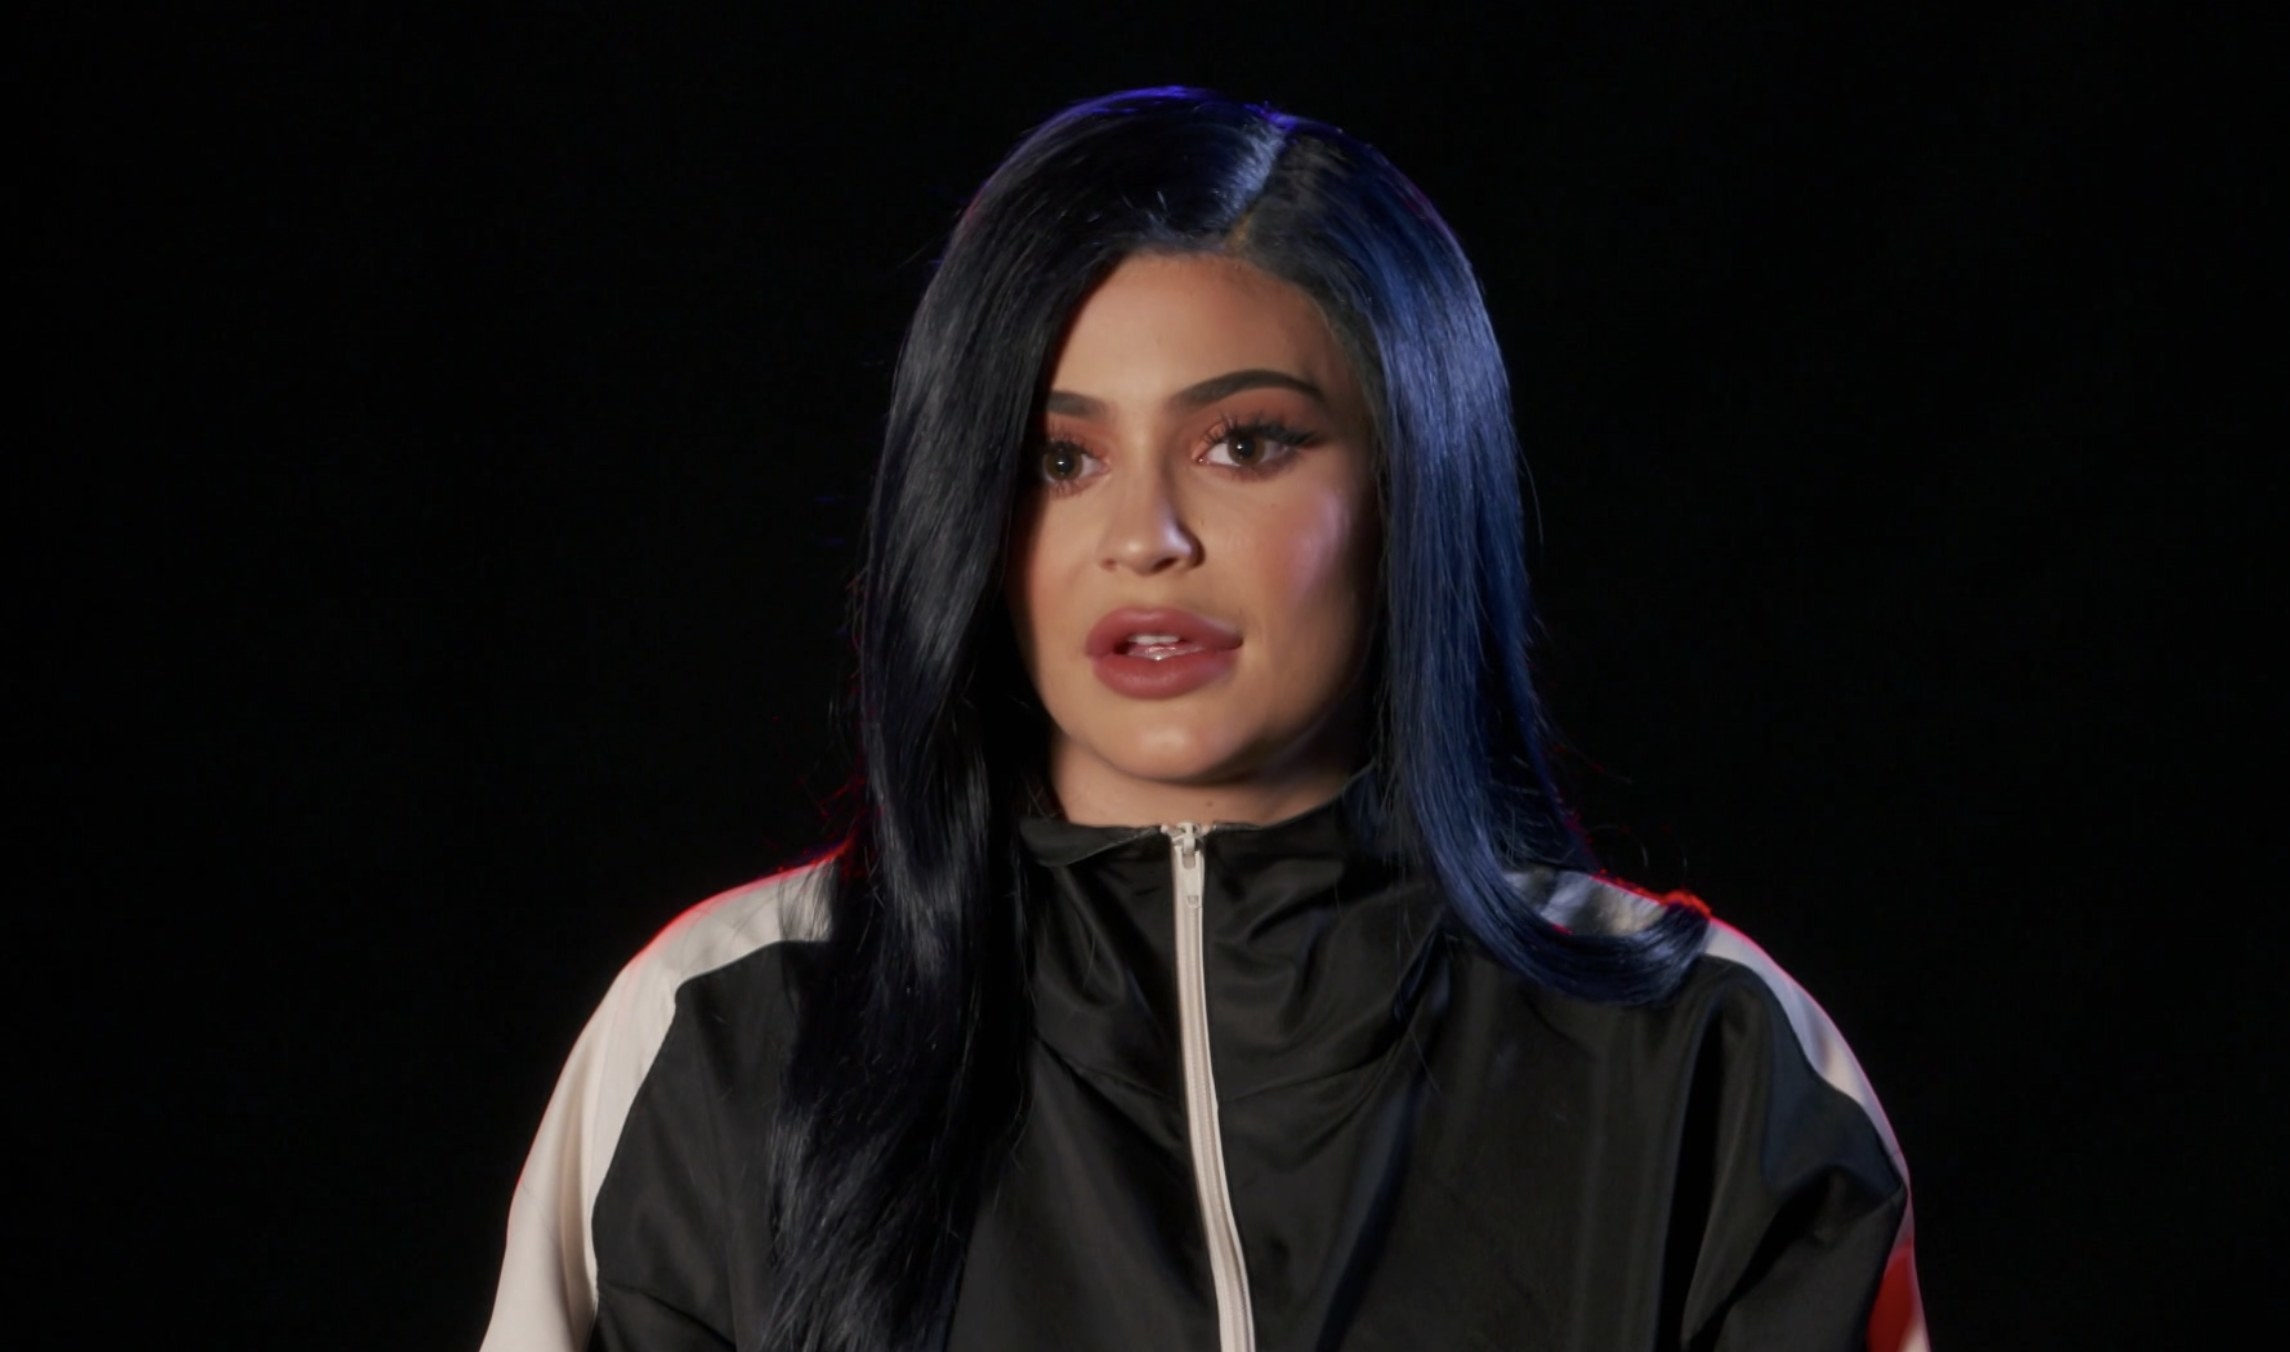 Kylie Jenner from Life of Kylie